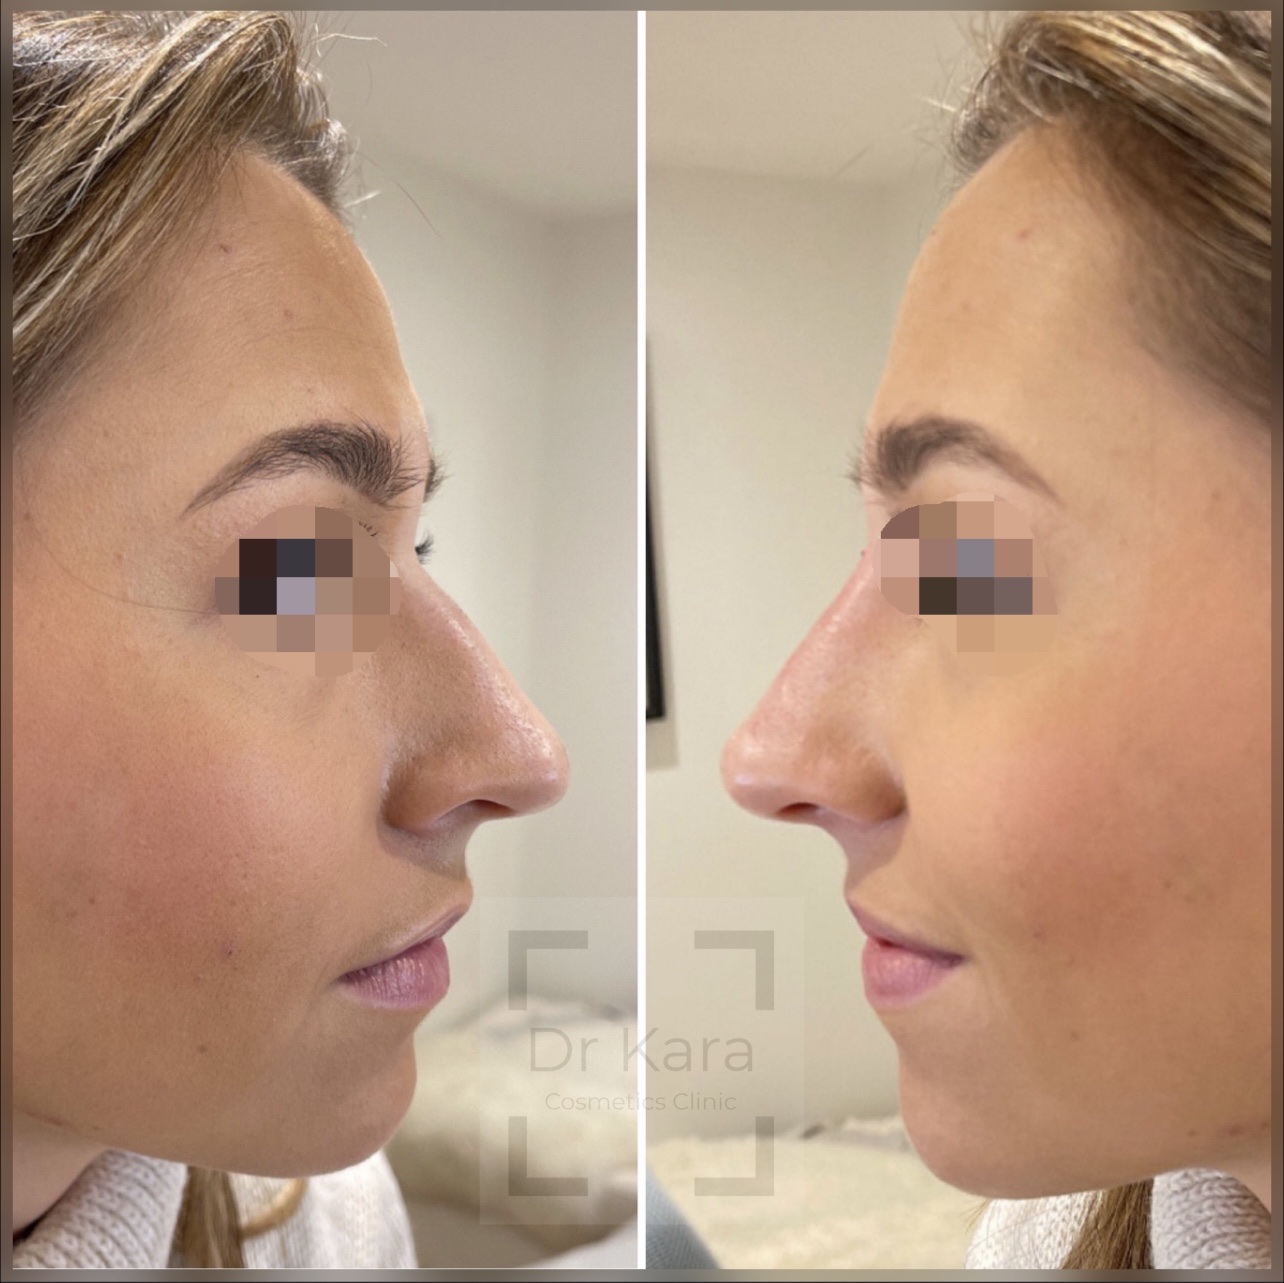 Non surgical rhinoplasty / Nose dermal filler result before and after by Dr Kara Cosmetic Clinic , Norwich , Norfolk , UK